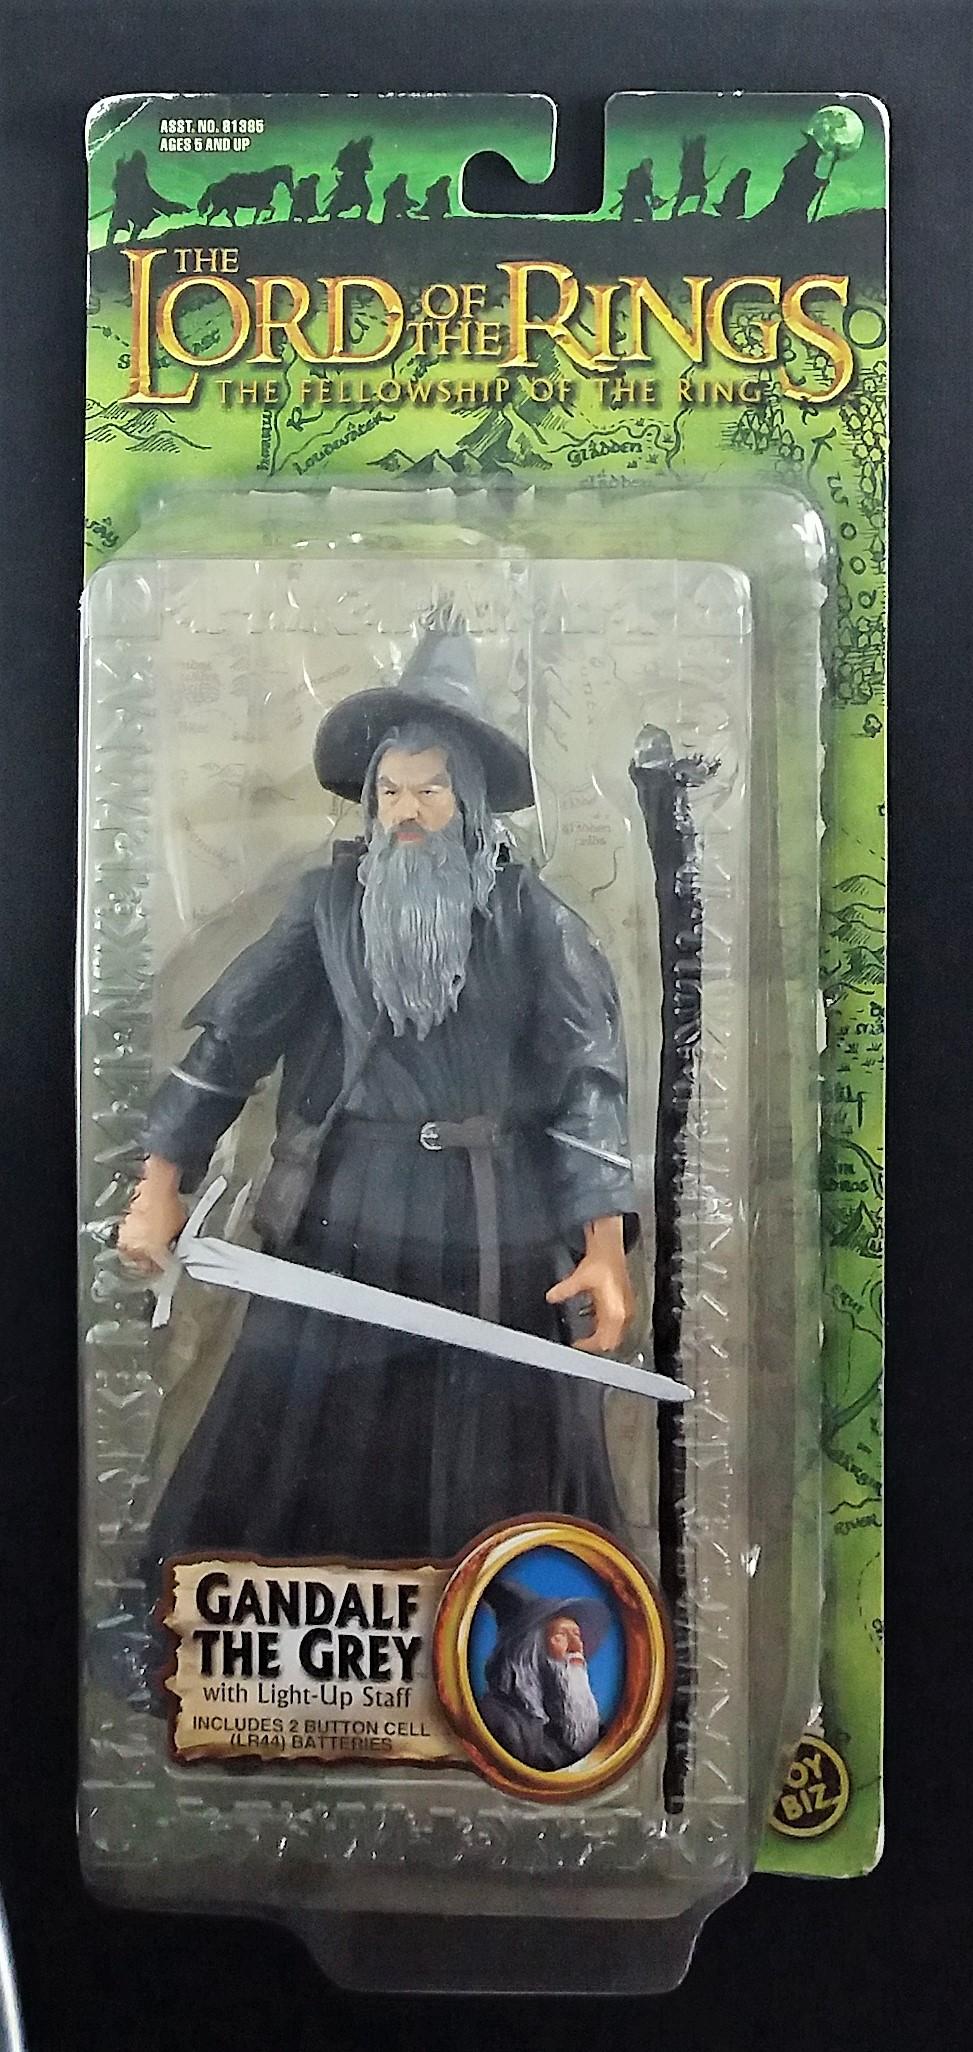 Gandalf The Grey Carded Lord of the Rings Action Figure Toy